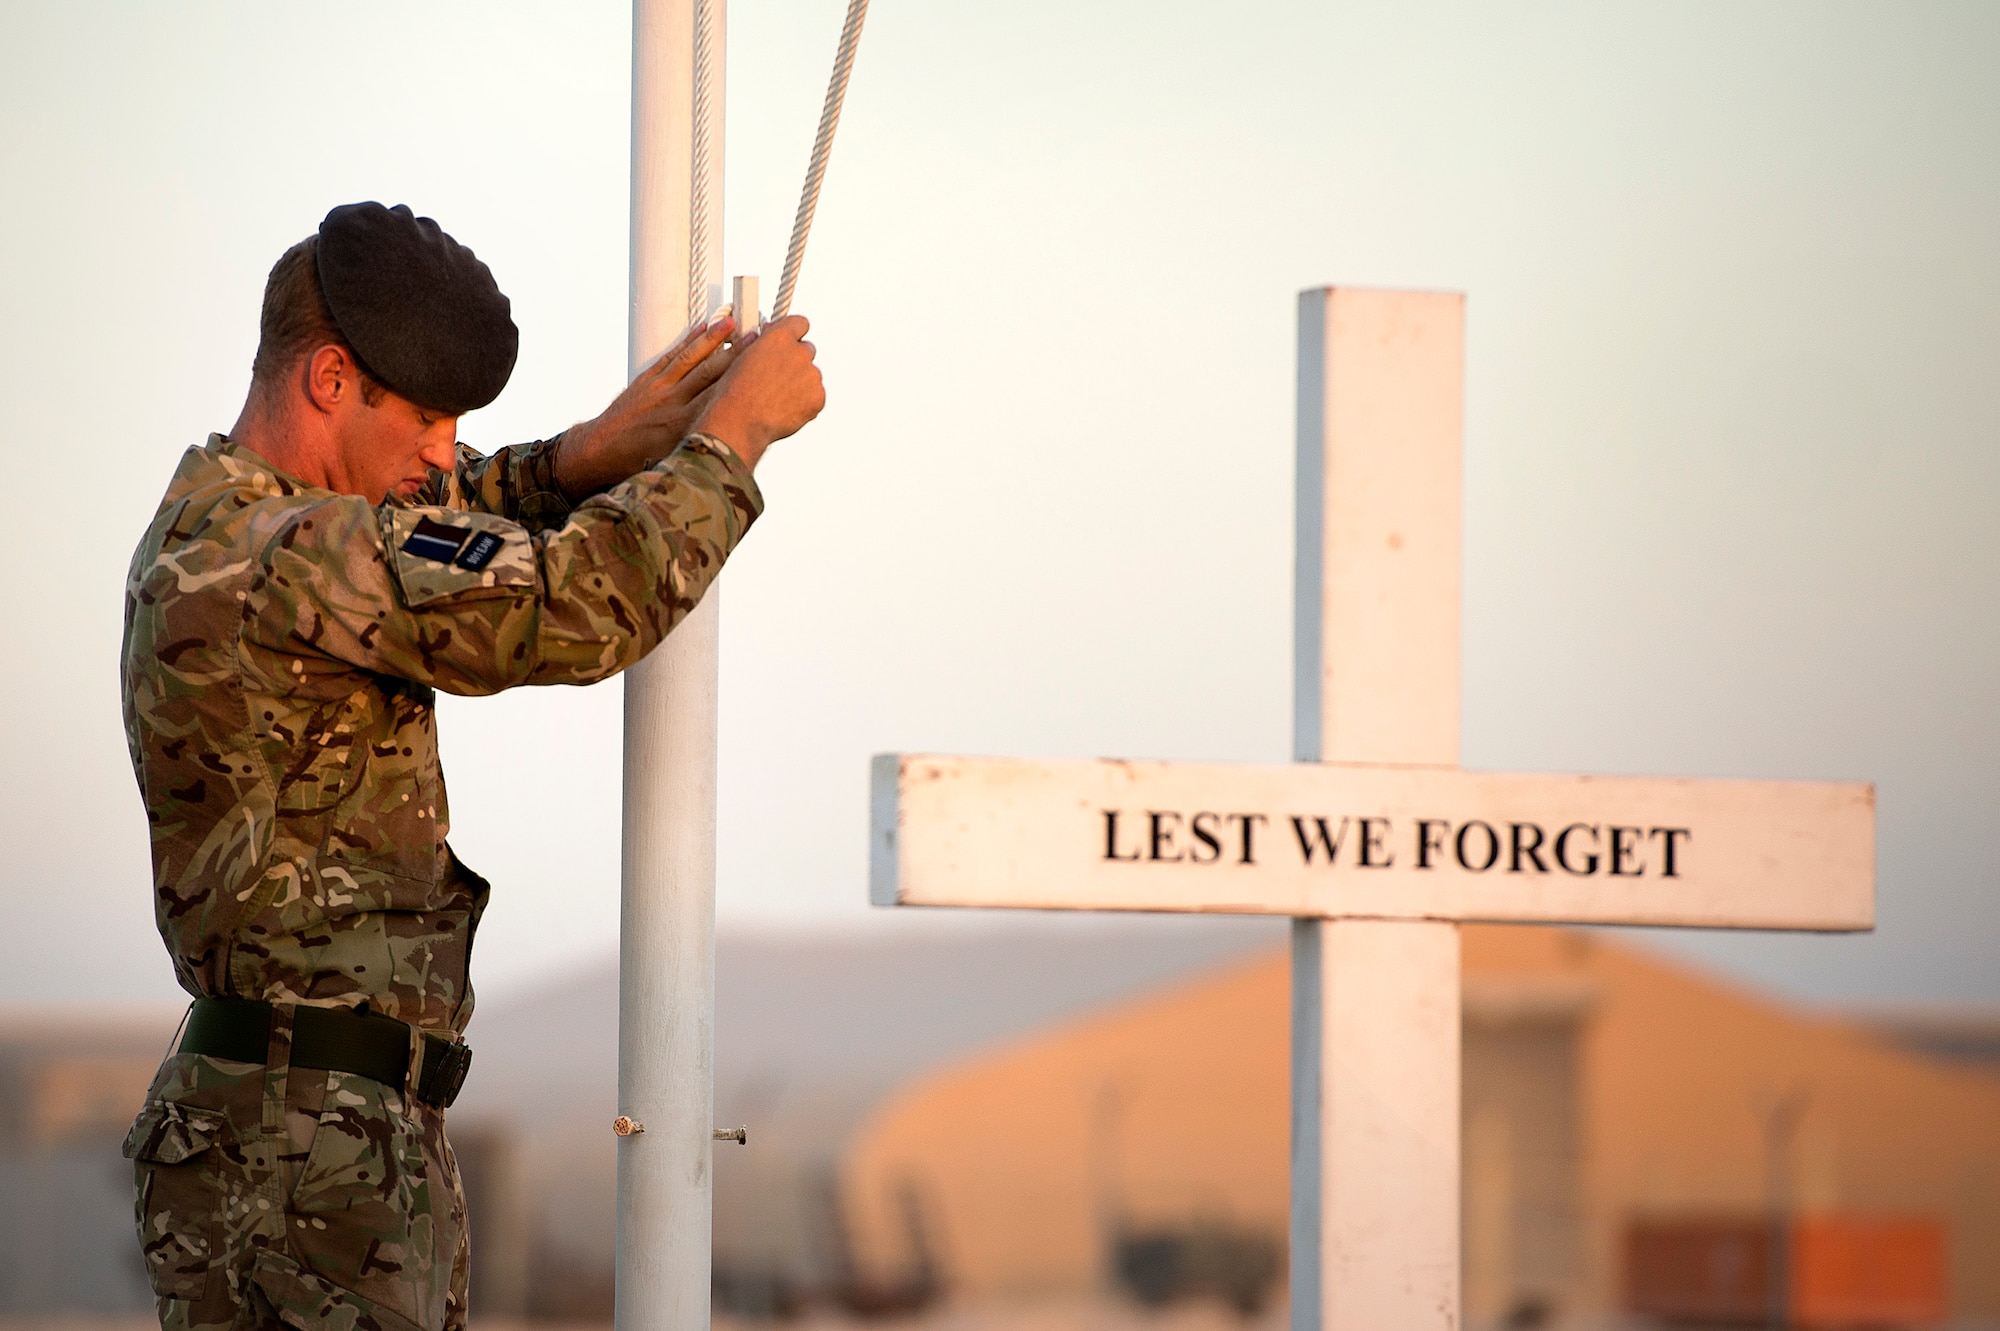 Royal Air Force Cpl. Olie Dunk pauses while lowering the English Union Flag during a sunset remembrance ceremony at the 83rd Expeditionary Air Group headquarters Nov. 9, 2013. The RAF's 83 EAG is responsible for all English units operating in Afghanistan and the Middle East. (USAF Photo by Master Sgt. Ben Bloker)